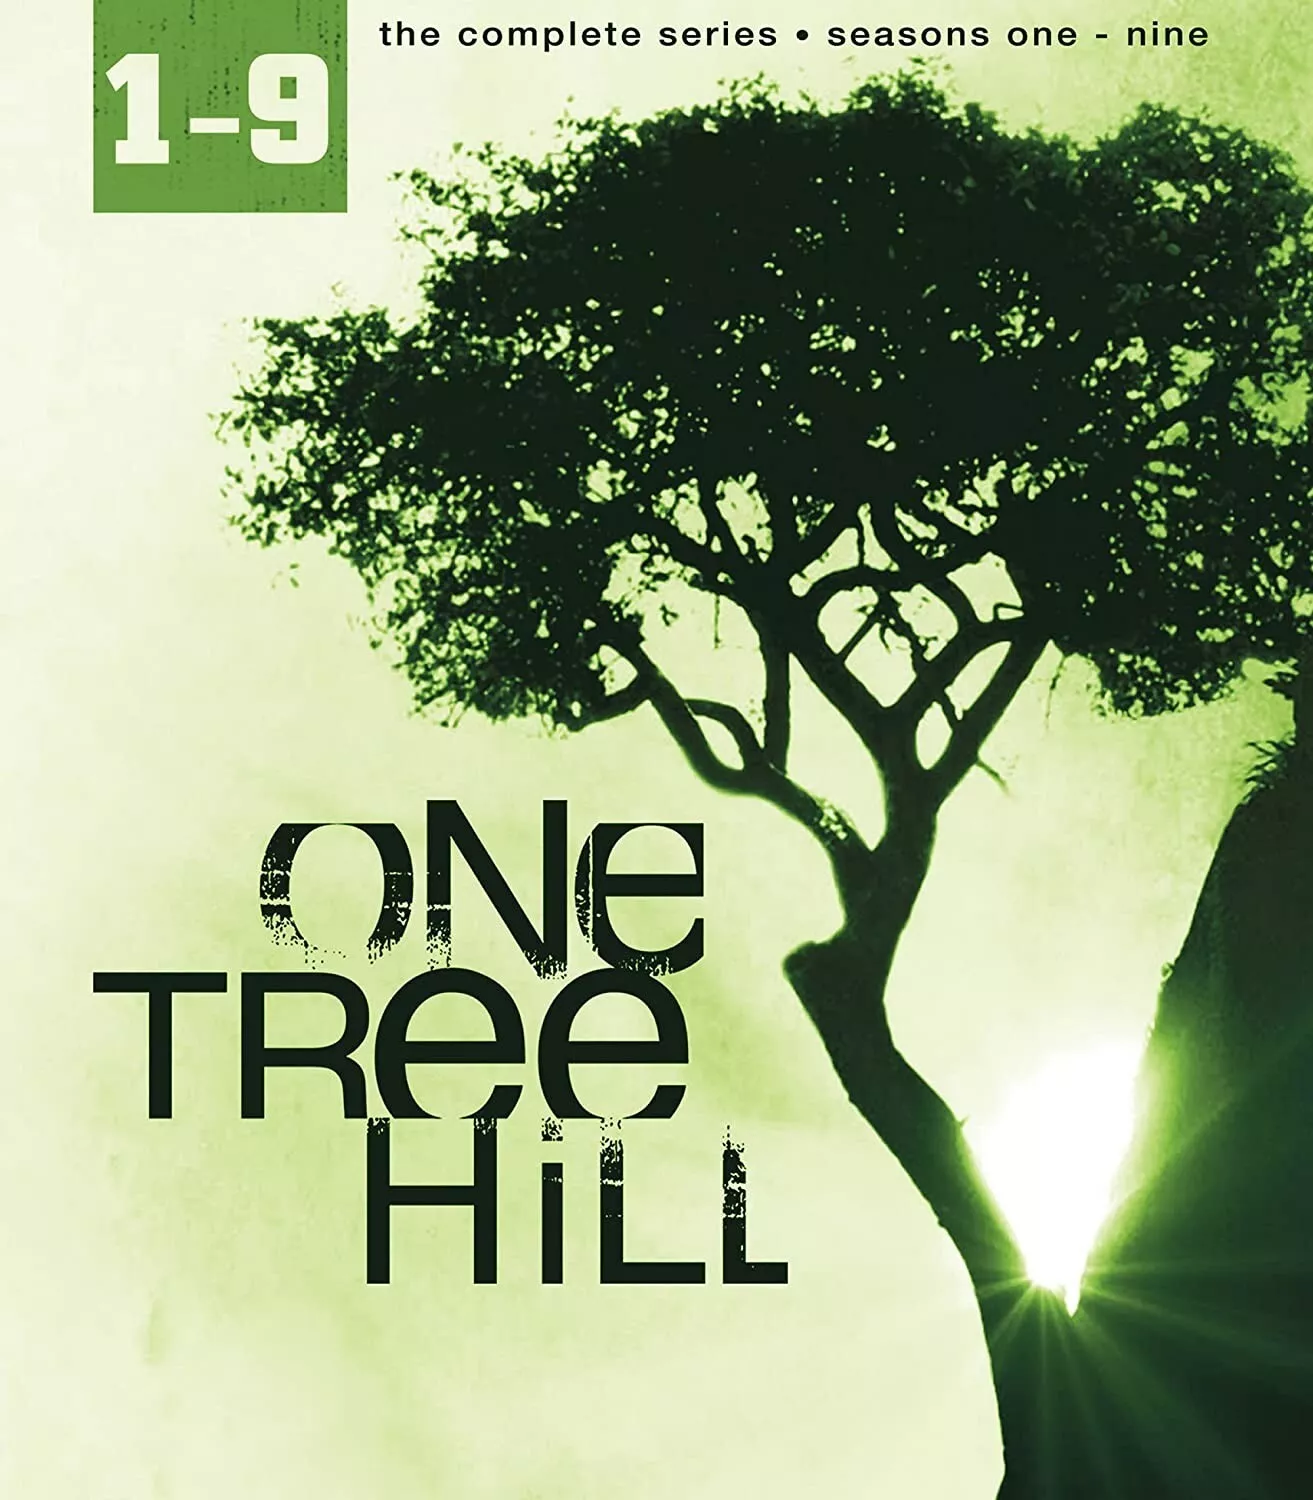 One Tree Hill: The Complete Series (Seasons 1-9) Box Set - $56.42